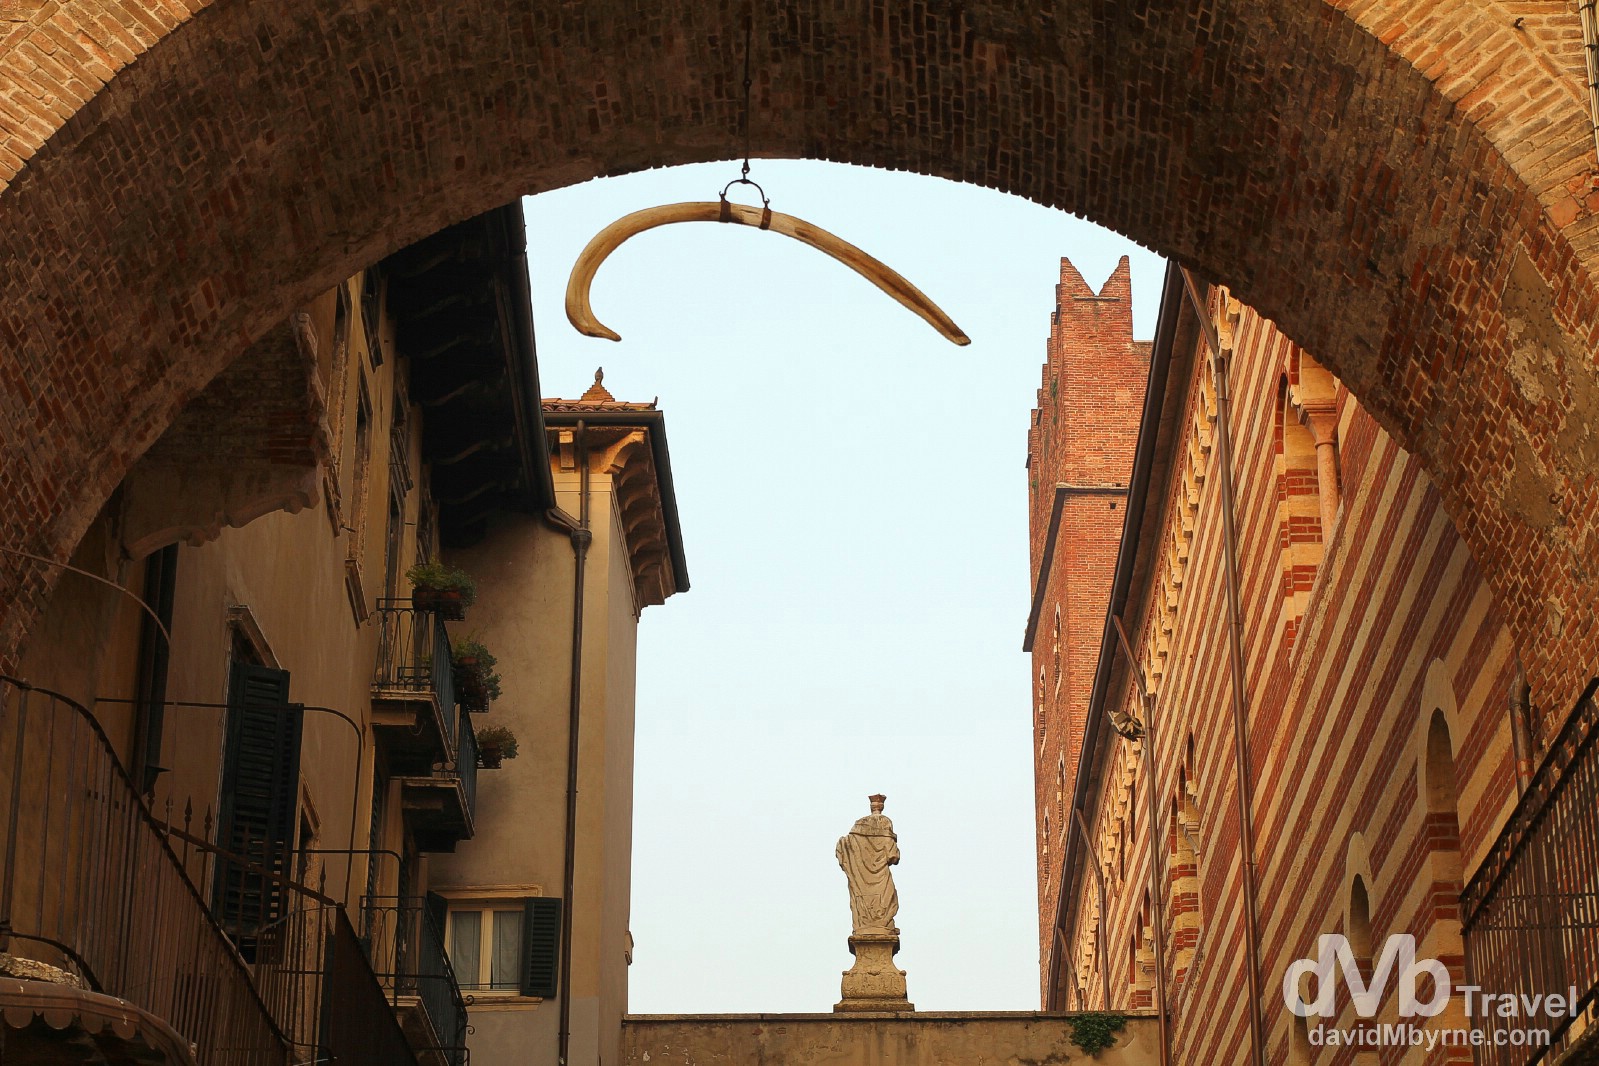 The Whale Bone hanging from Arco della Costa in Verona, Italy. march 17, 2014.